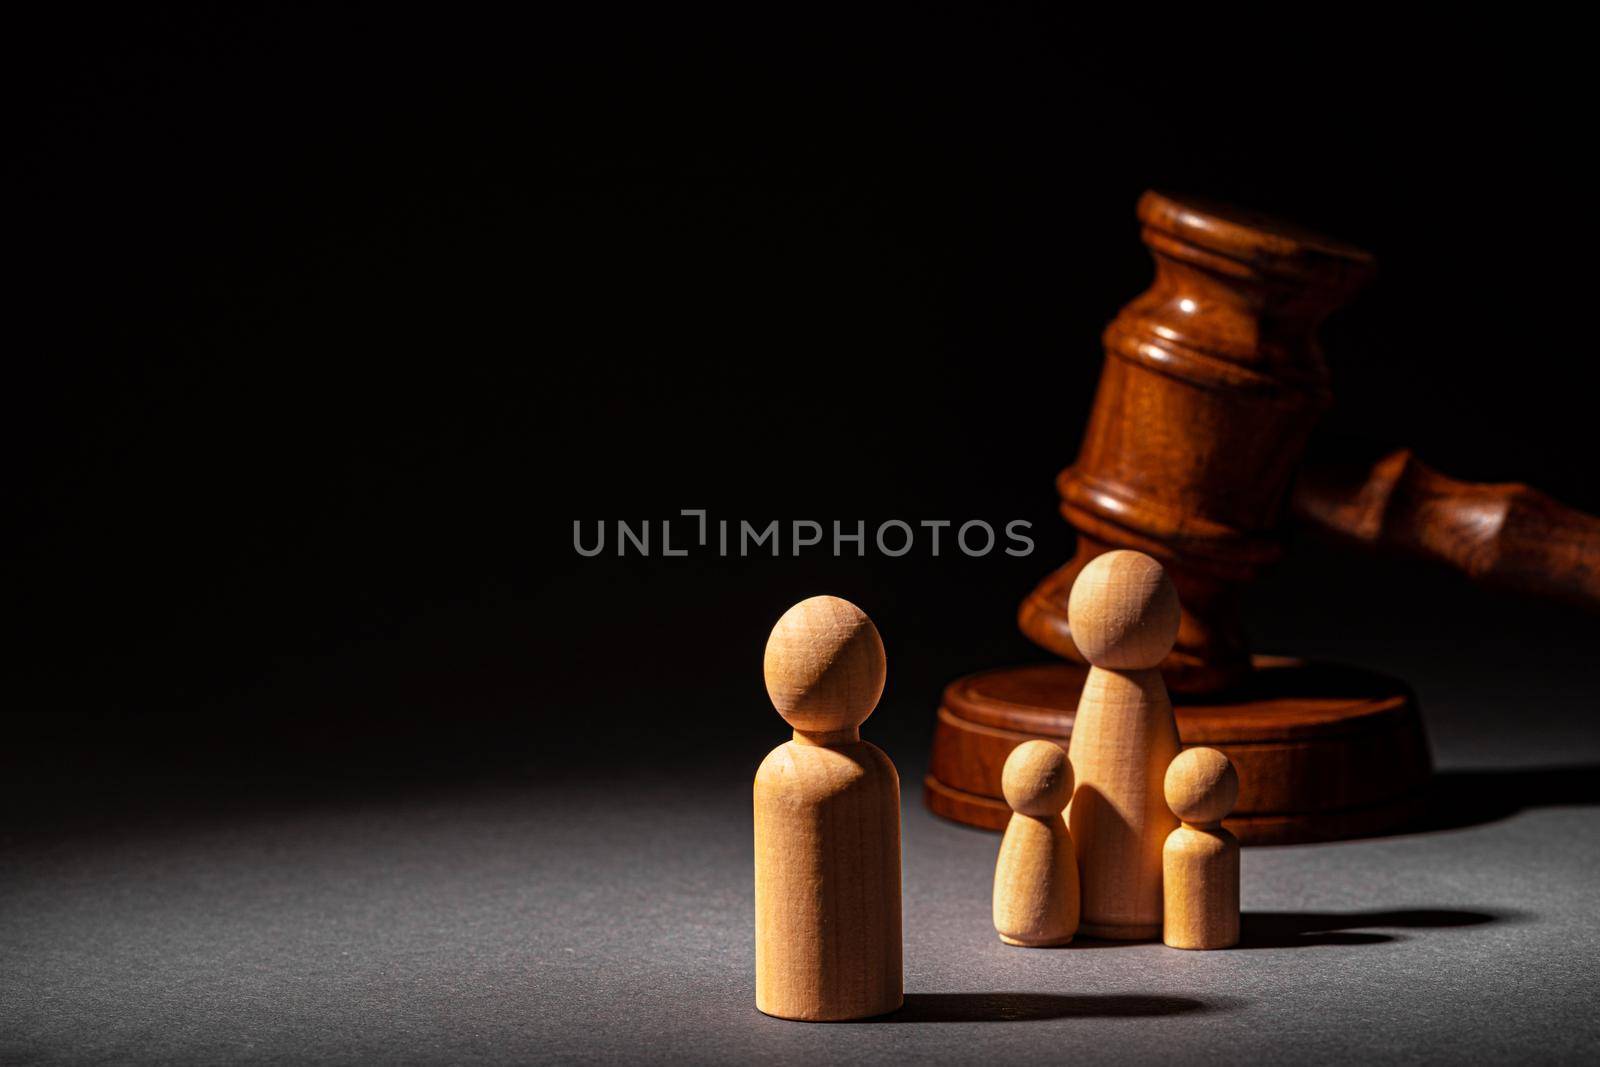 Wooden toy family and judge mallet close up. Family divorce concept